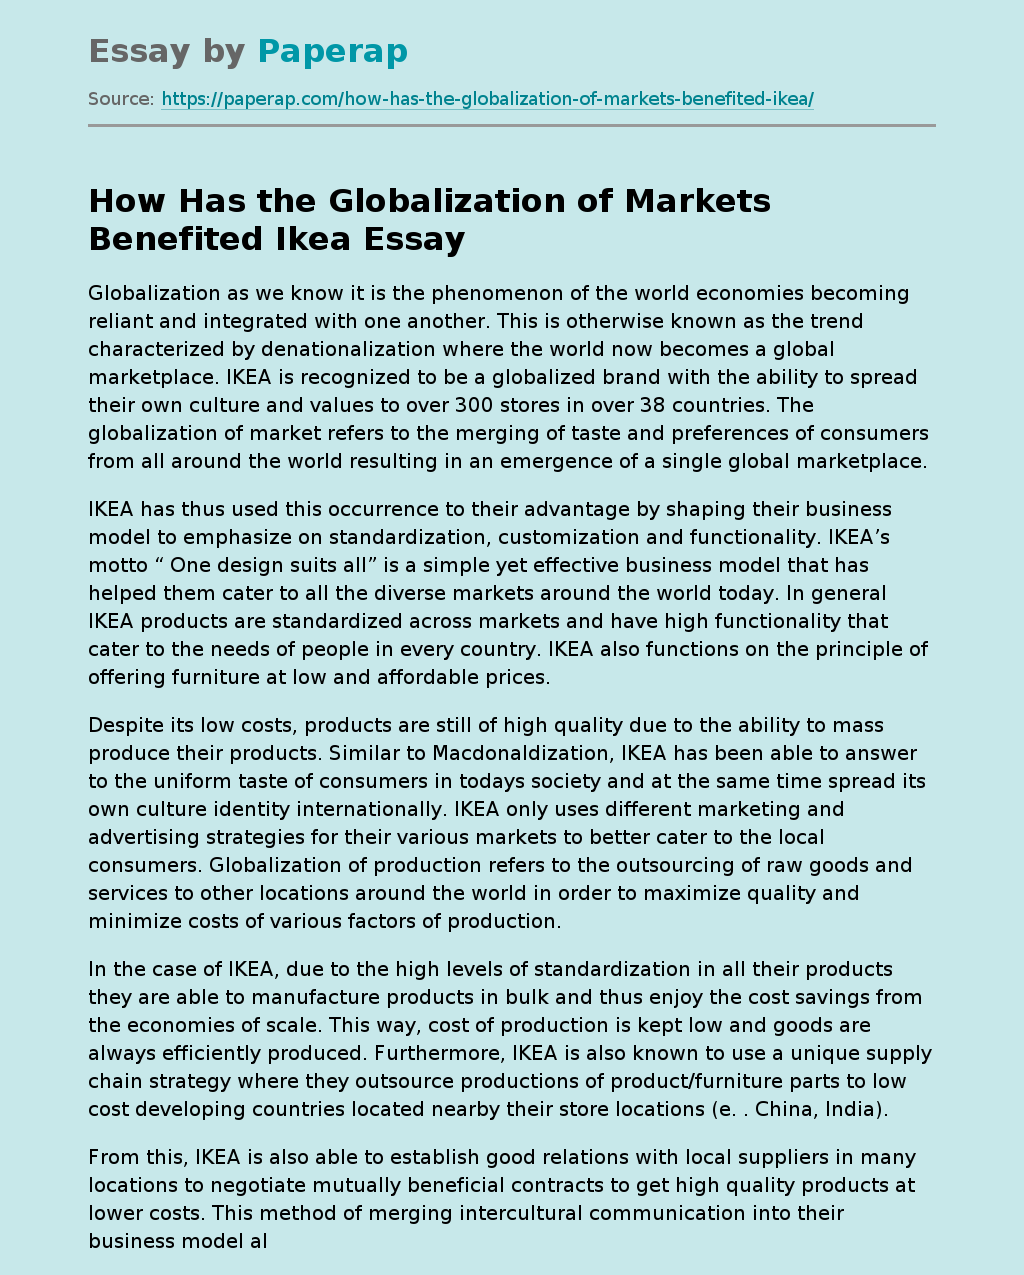 How Has the Globalization of Markets Benefited Ikea